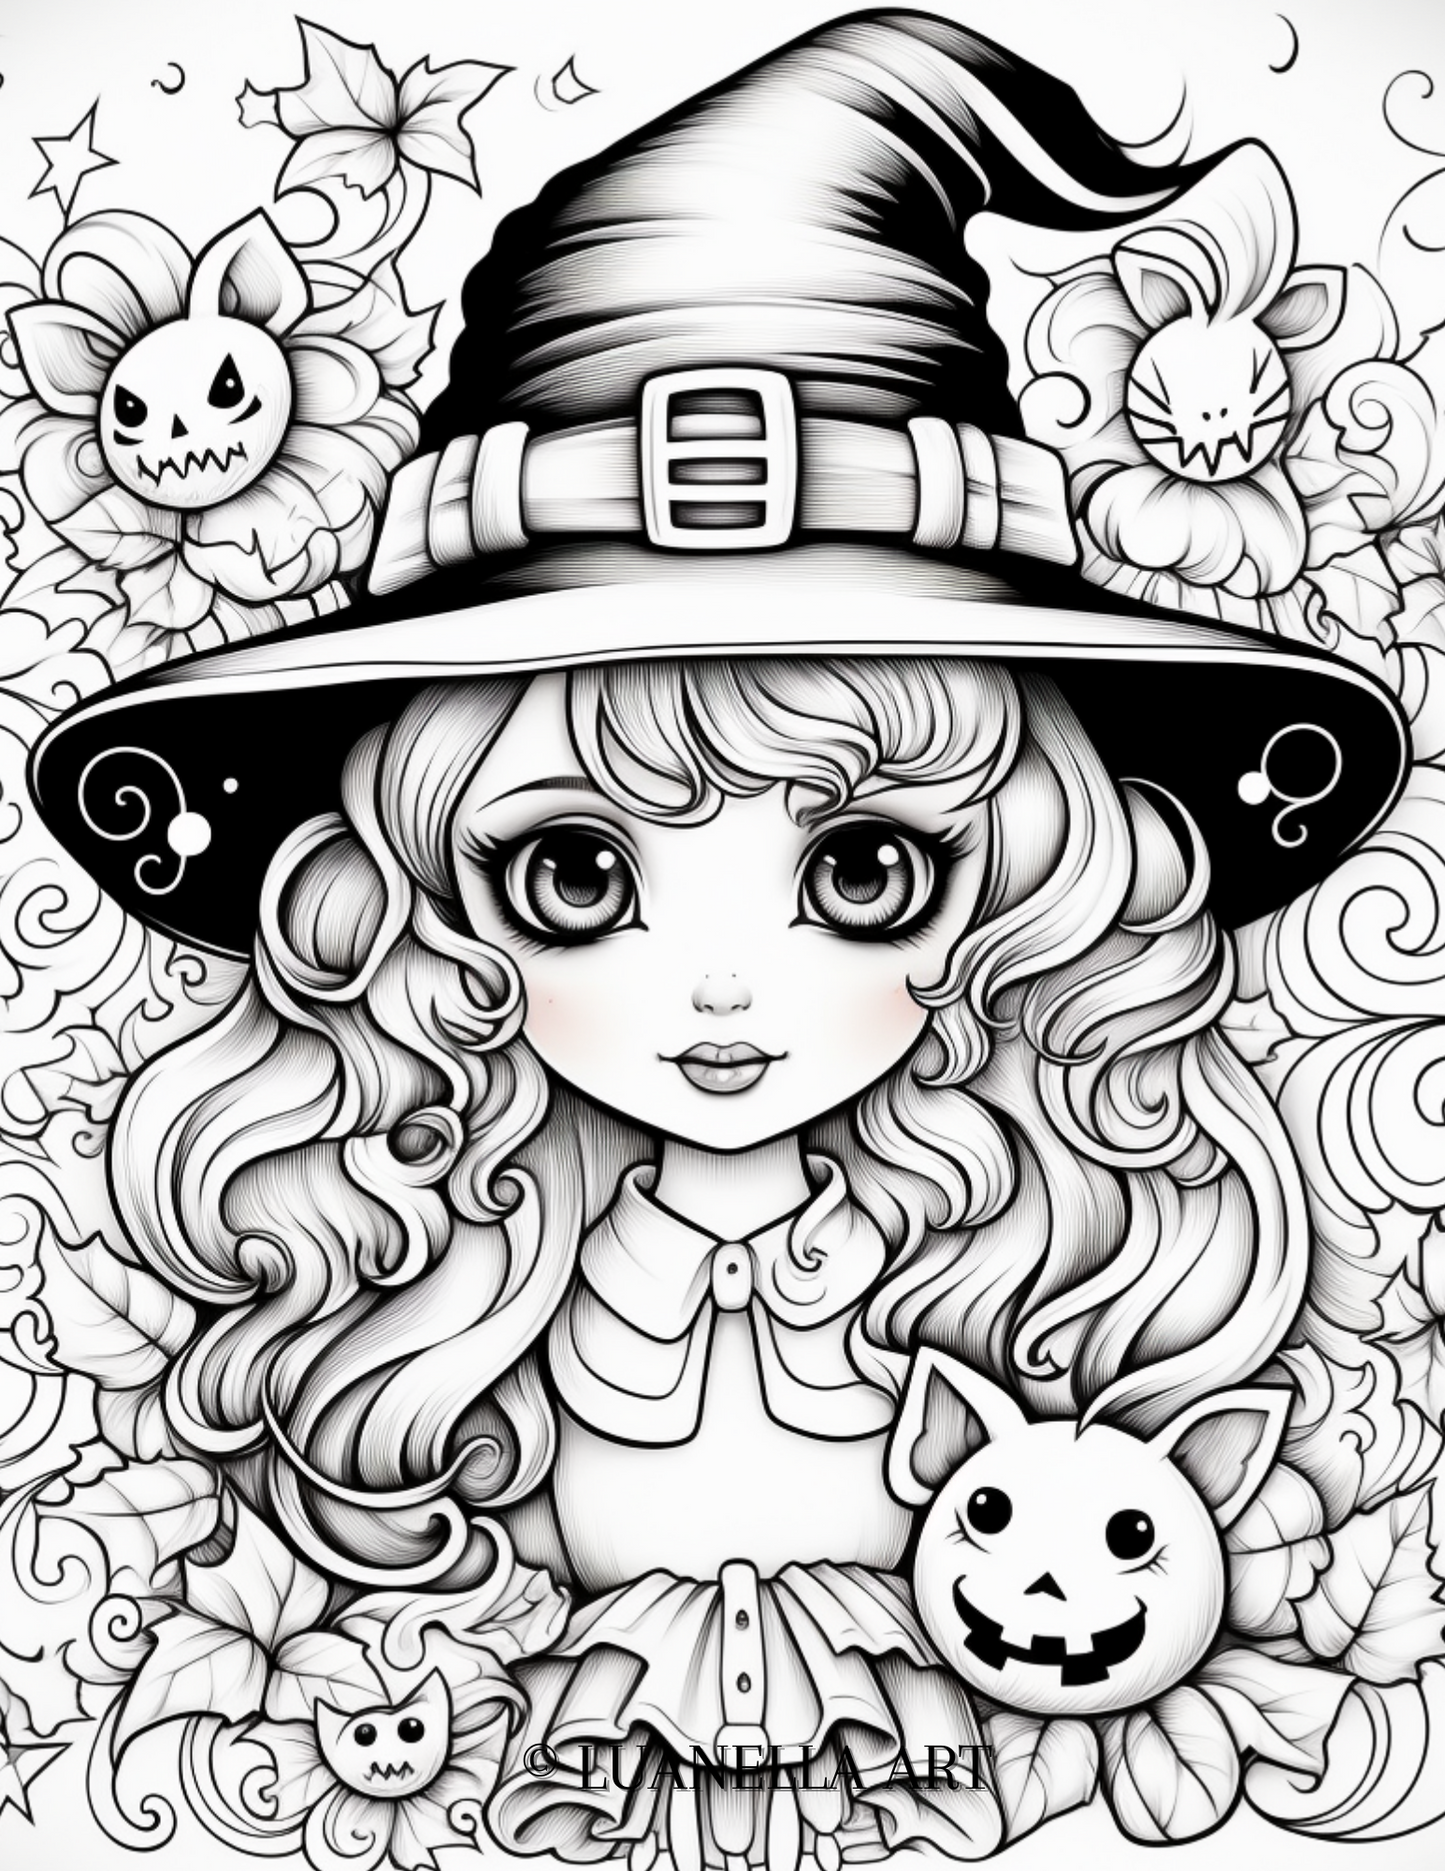 Cute Halloween WitchyWitch | Coloring Page | Instant Digital Download